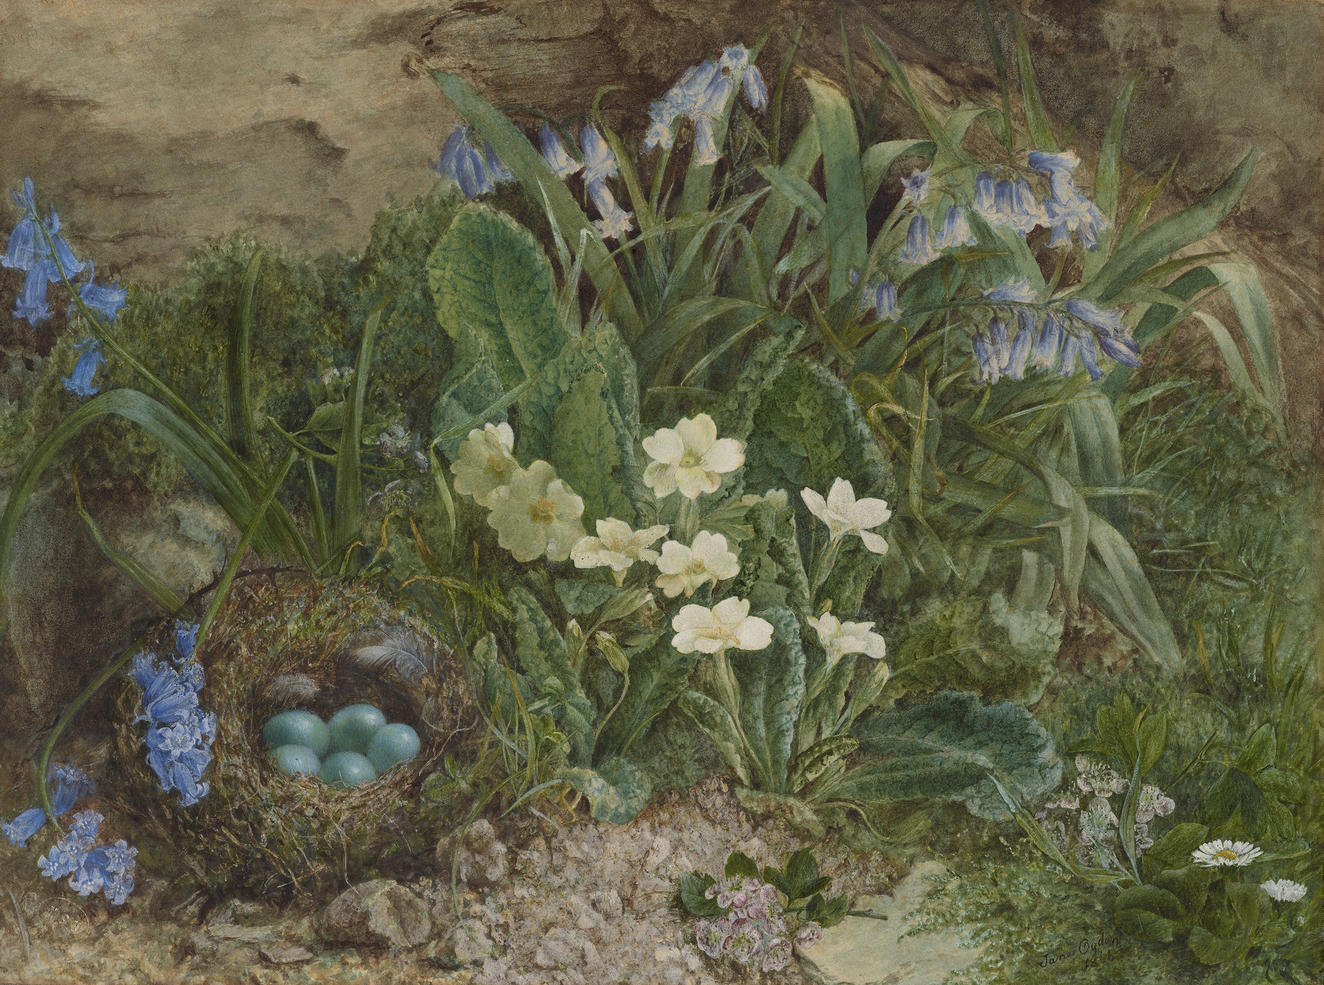 Watercolor drawing of a thriving nature scene. We look down at a lush tangle of green leafy plant life with bluebells and white primroses. Five shining teal bird's eggs lay in a cozy moss and twig nest in the lower left.